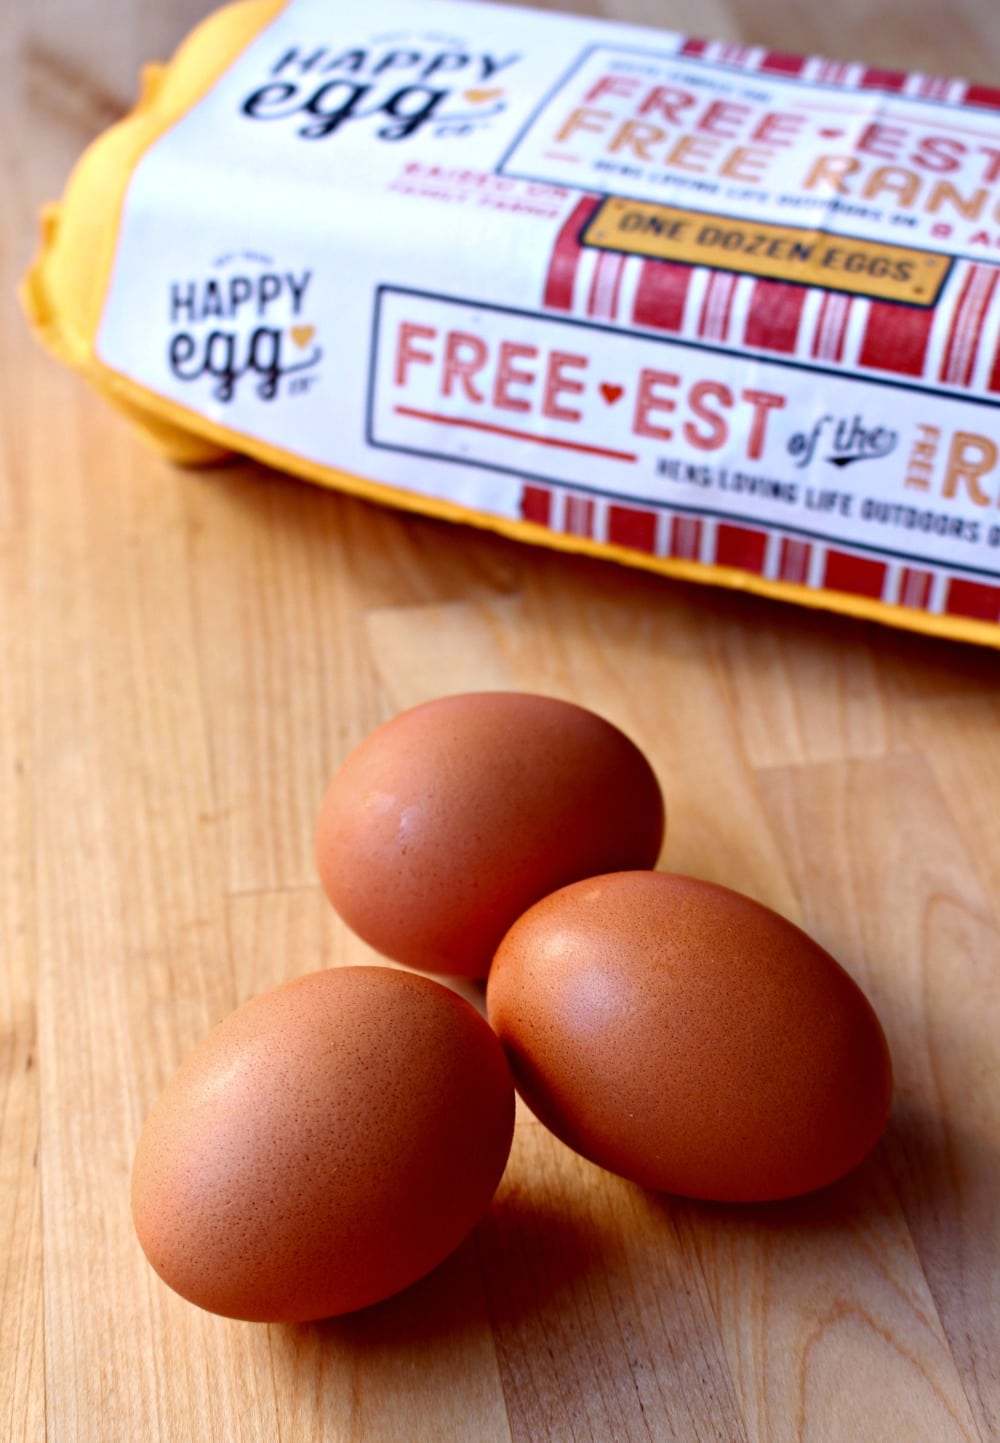 Three eggs with a carton of Happy Egg in the background.